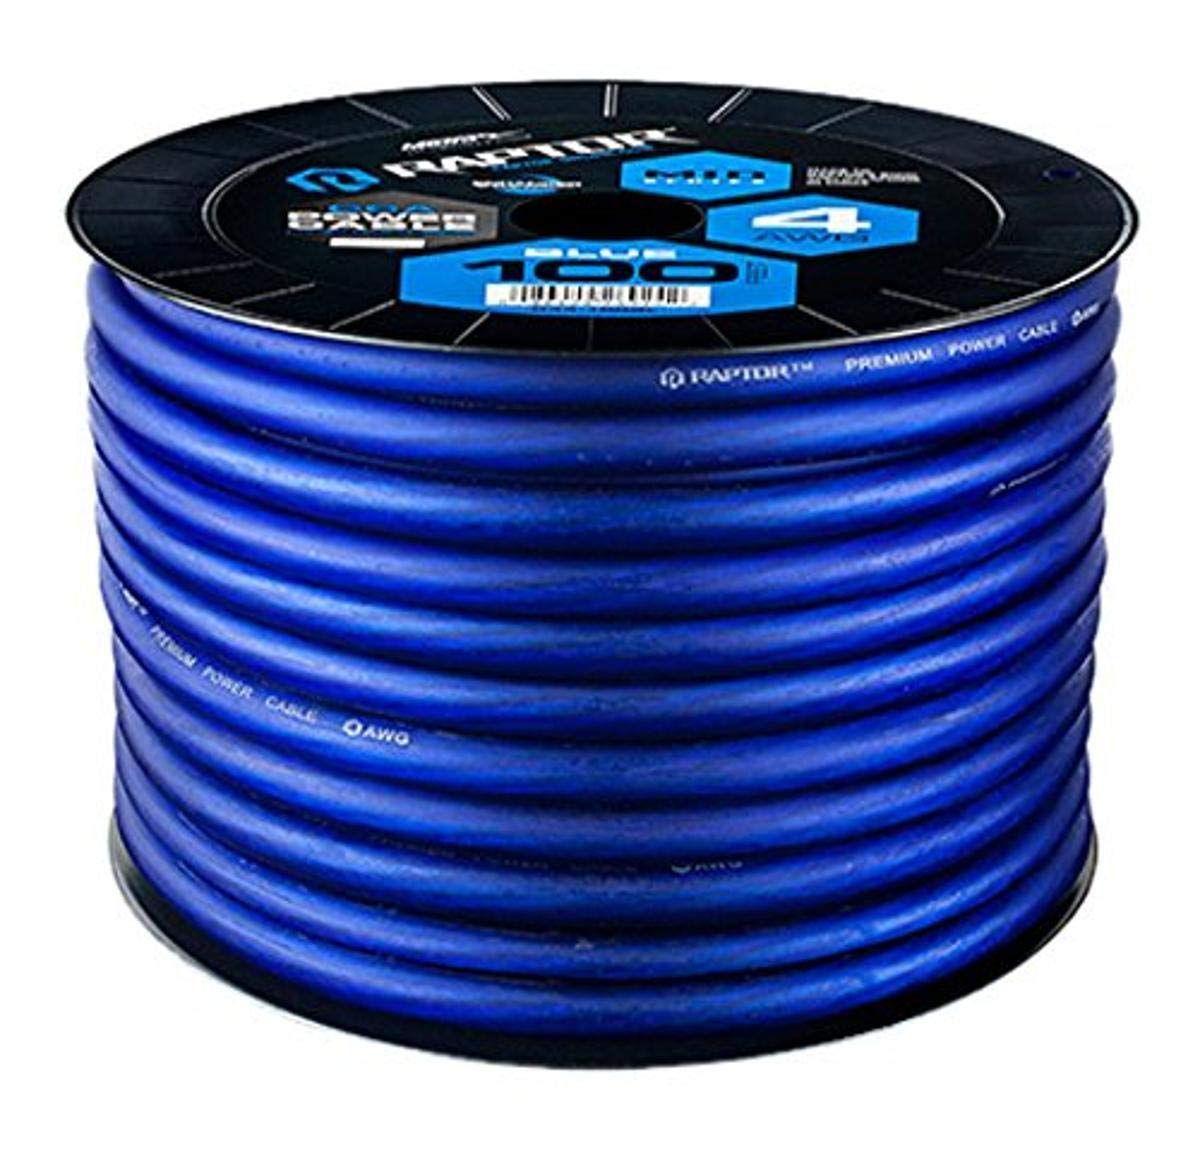 100FT 4 AWG BLUE CCA MIDSERIES POWER CABLE